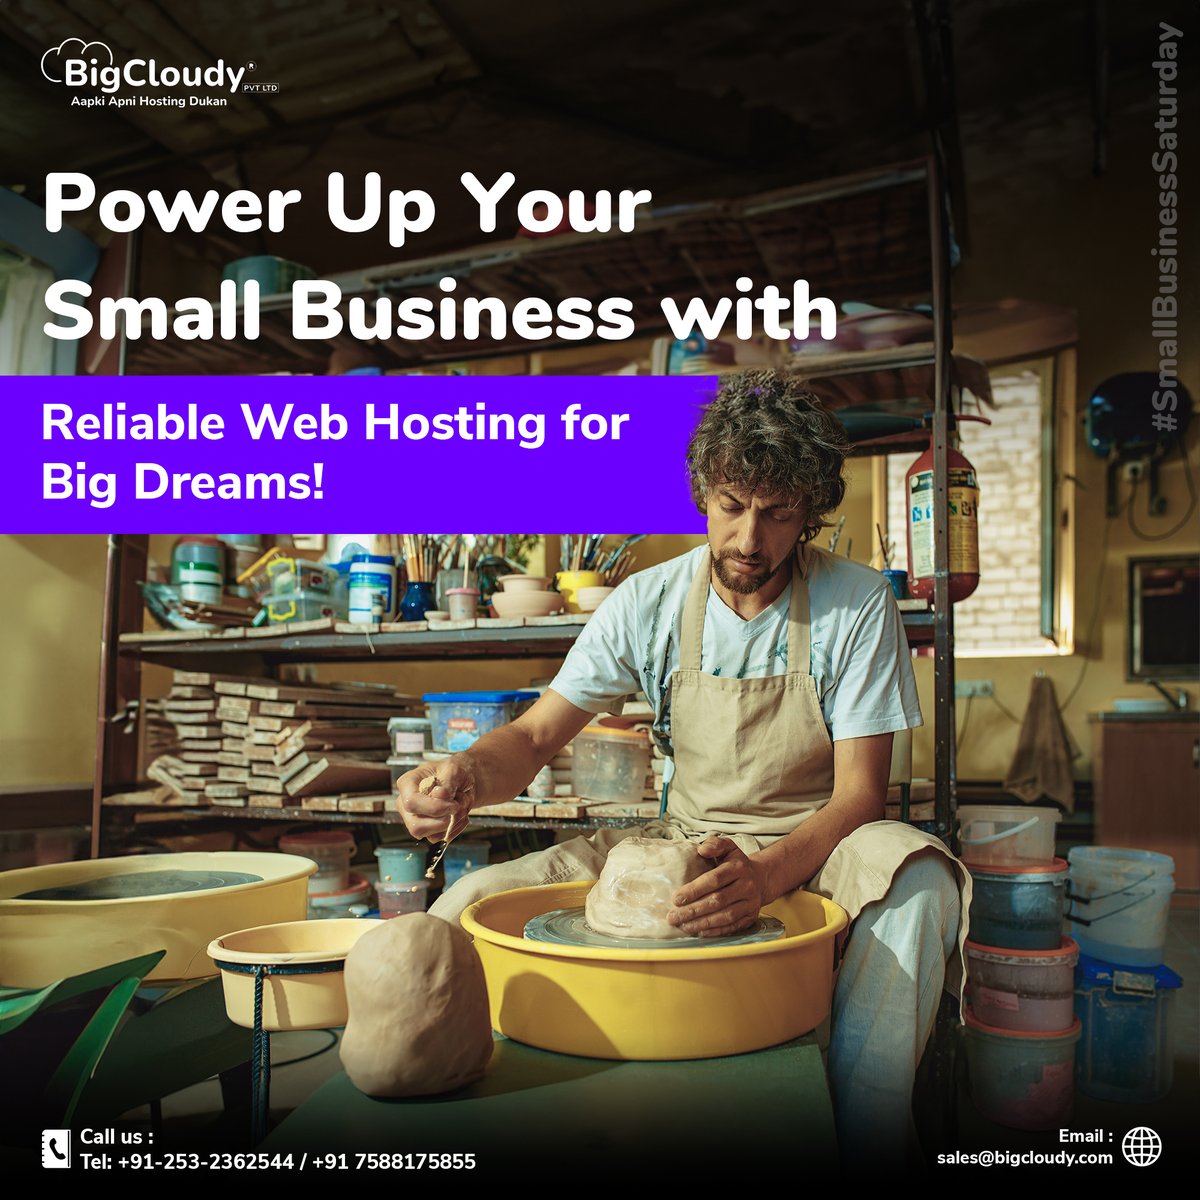 Fuel your #smallbusiness 🚀 ambitions with the power of Reliable 🌐 #WebHosting! ⚡️ Don't let technical setbacks hold you back. 😕 
With Rock-solid Support 🎧 and Unbeatable uptime, ⌛ your journey to success starts here. 👨🏻‍💻

#SmallBusinessSaturday #BigCloudy #OnlinePresence